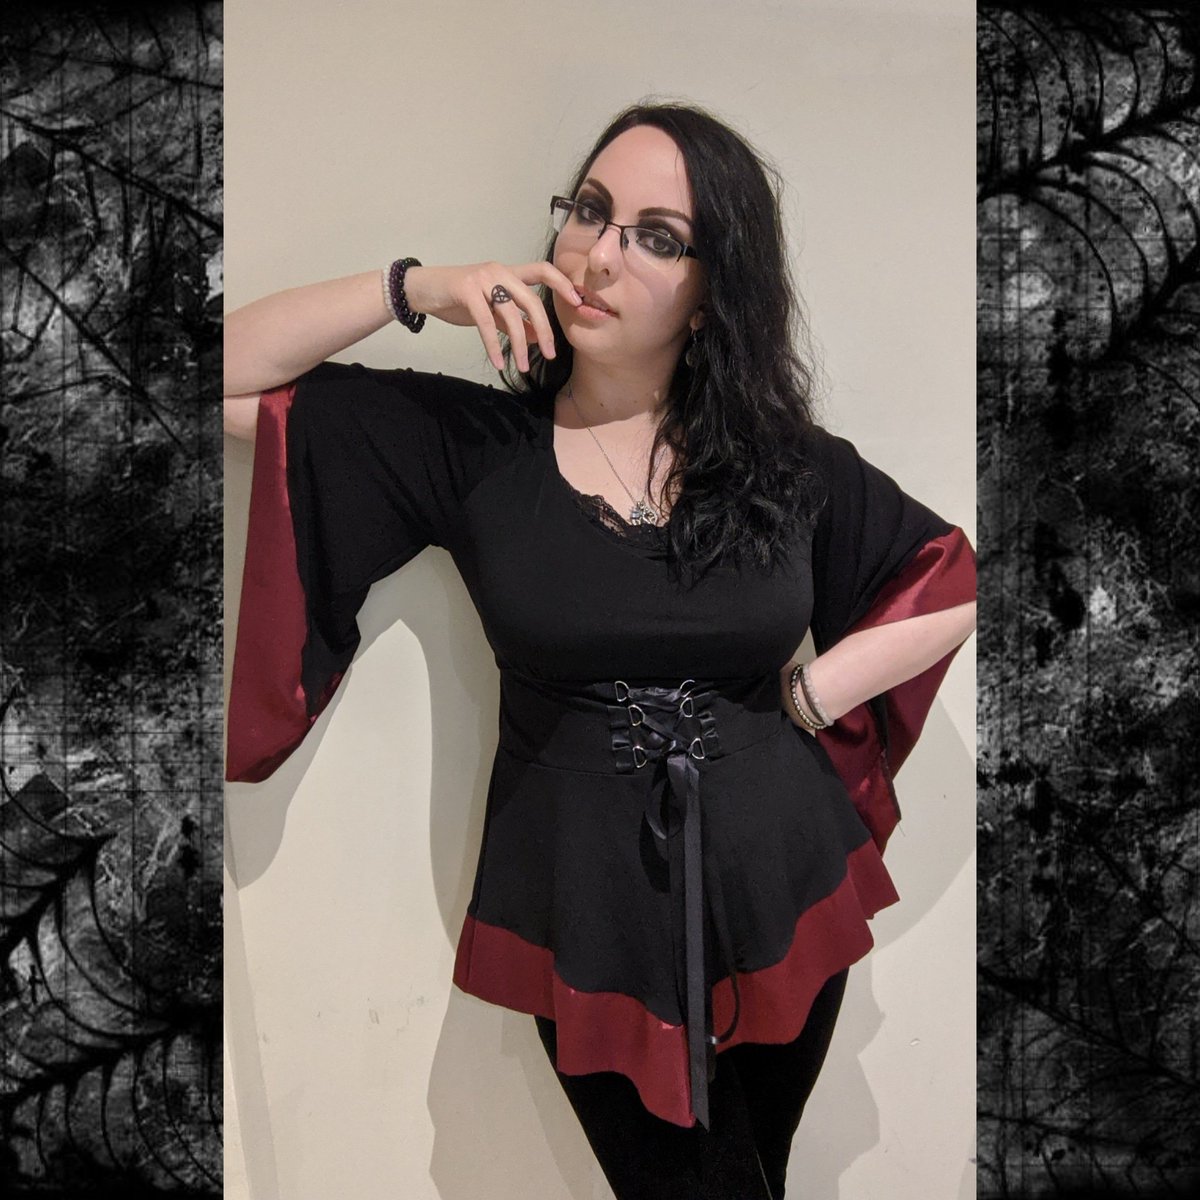 What activities keep you happy on a rainy day?
.
#goth #gothic #gothgirl #wicca #witch #followme #cute #fashion #black #blackhair #model #gothaesthetic #palegirl #gothsofinstagram #blackismyhappycolour #witchy #follow #dark #love #ootd #gothgoth #photo #photooftheday